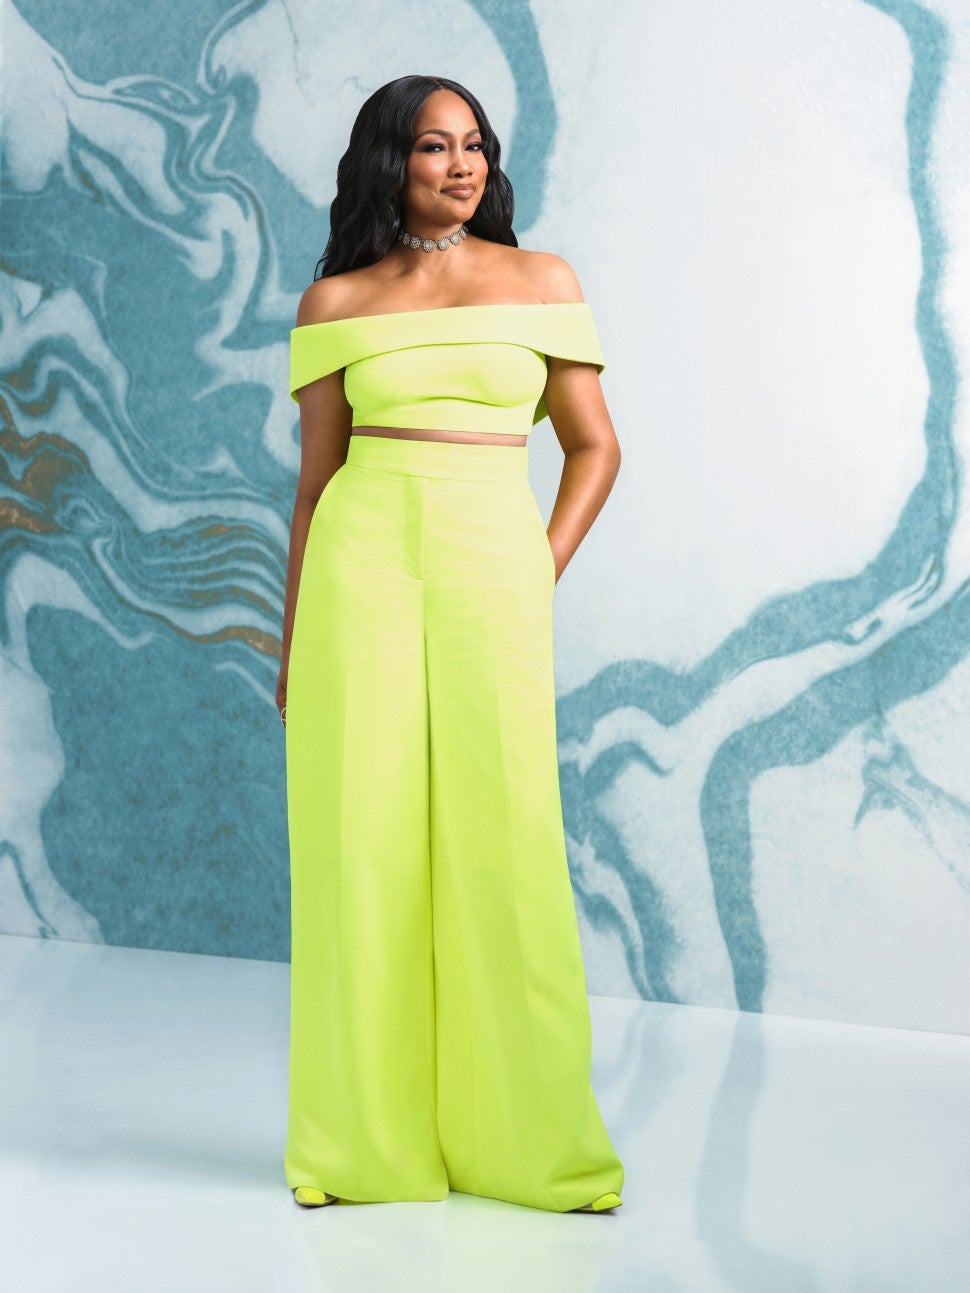 Garcelle Beauvais of Bravo's 'The Real Housewives of Beverly Hills'